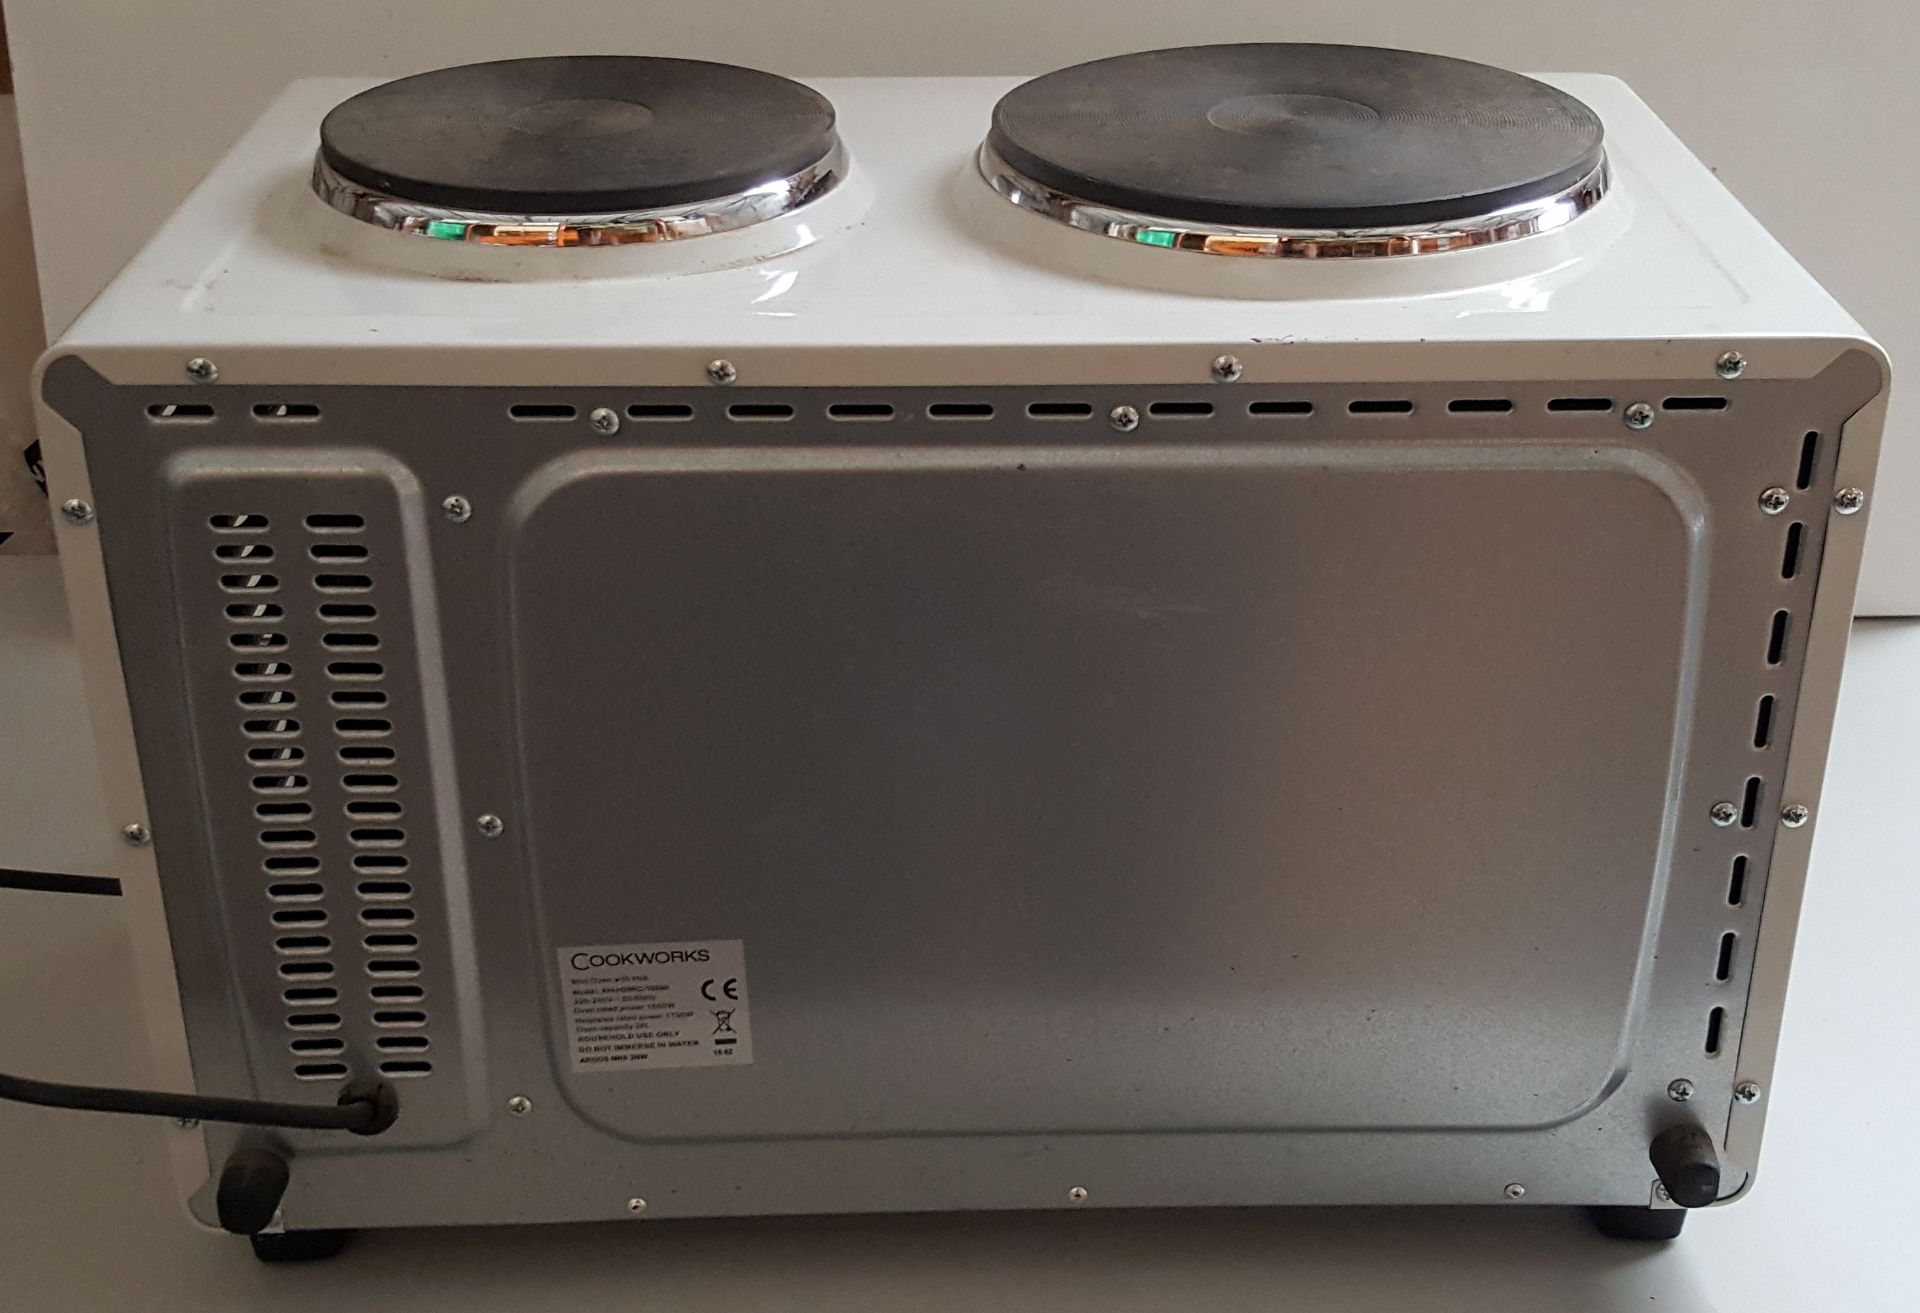 1 x Cookworks Mini Oven Dual Hobs 1750W KH-H28RC-10Skh - Ref RC141  - CL011 - Location: Altrincham - Image 4 of 4